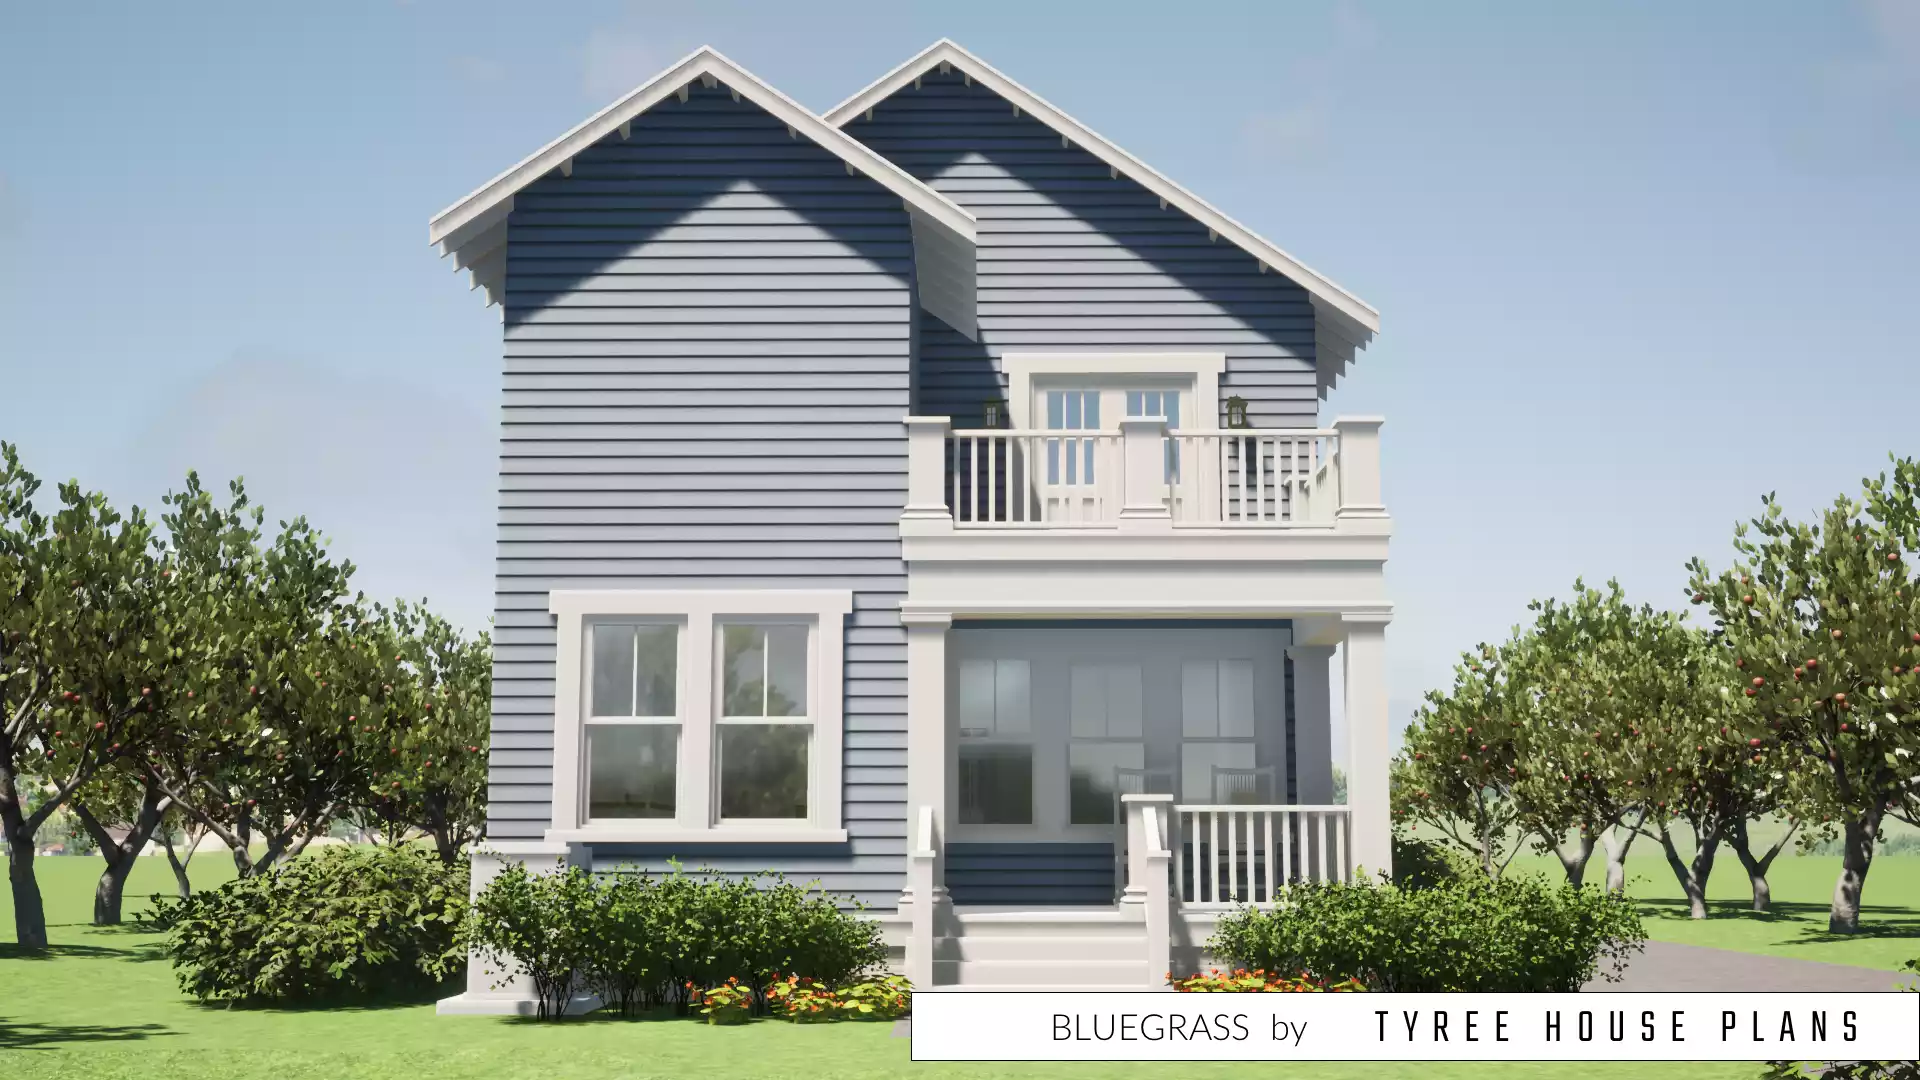 Back of house. Bluegrass by Tyree House Plans.